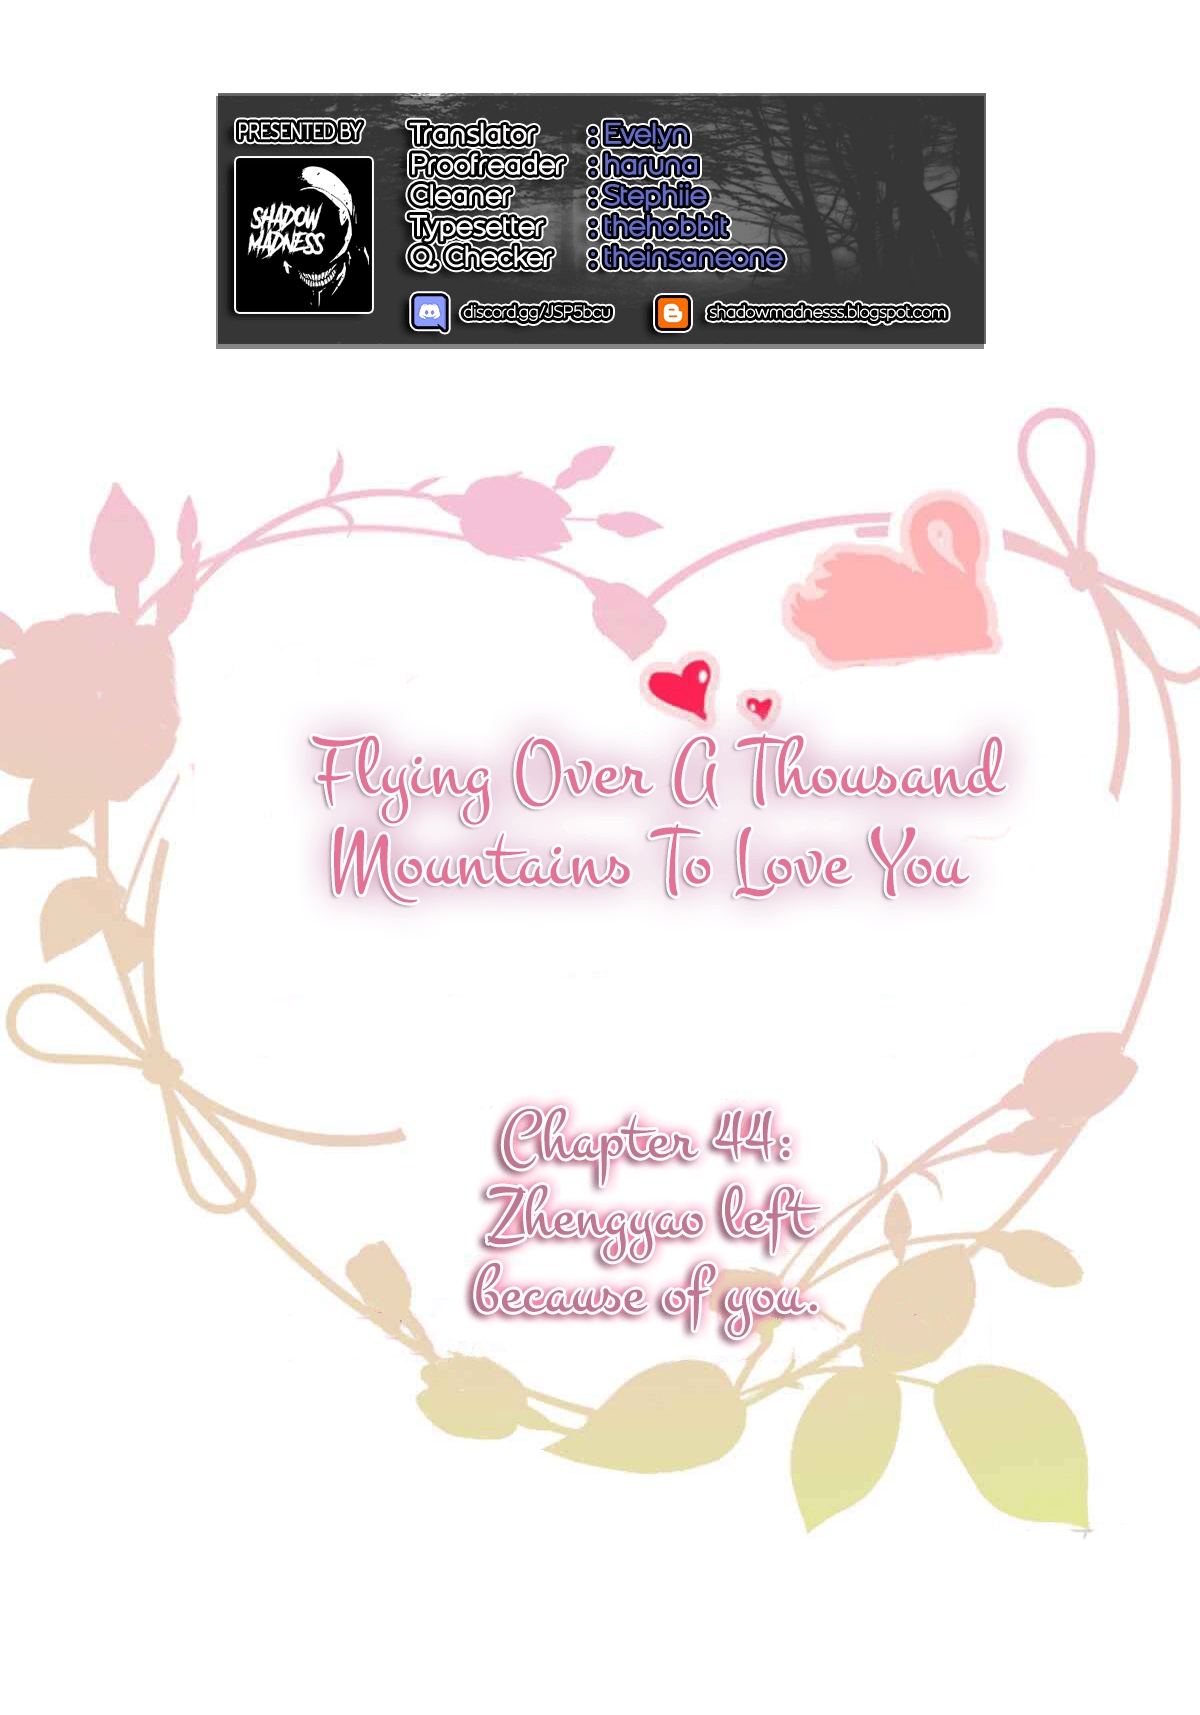 Flying Over a Thousand Mountains to Love You Ch. 44 Zhengyao left because of you